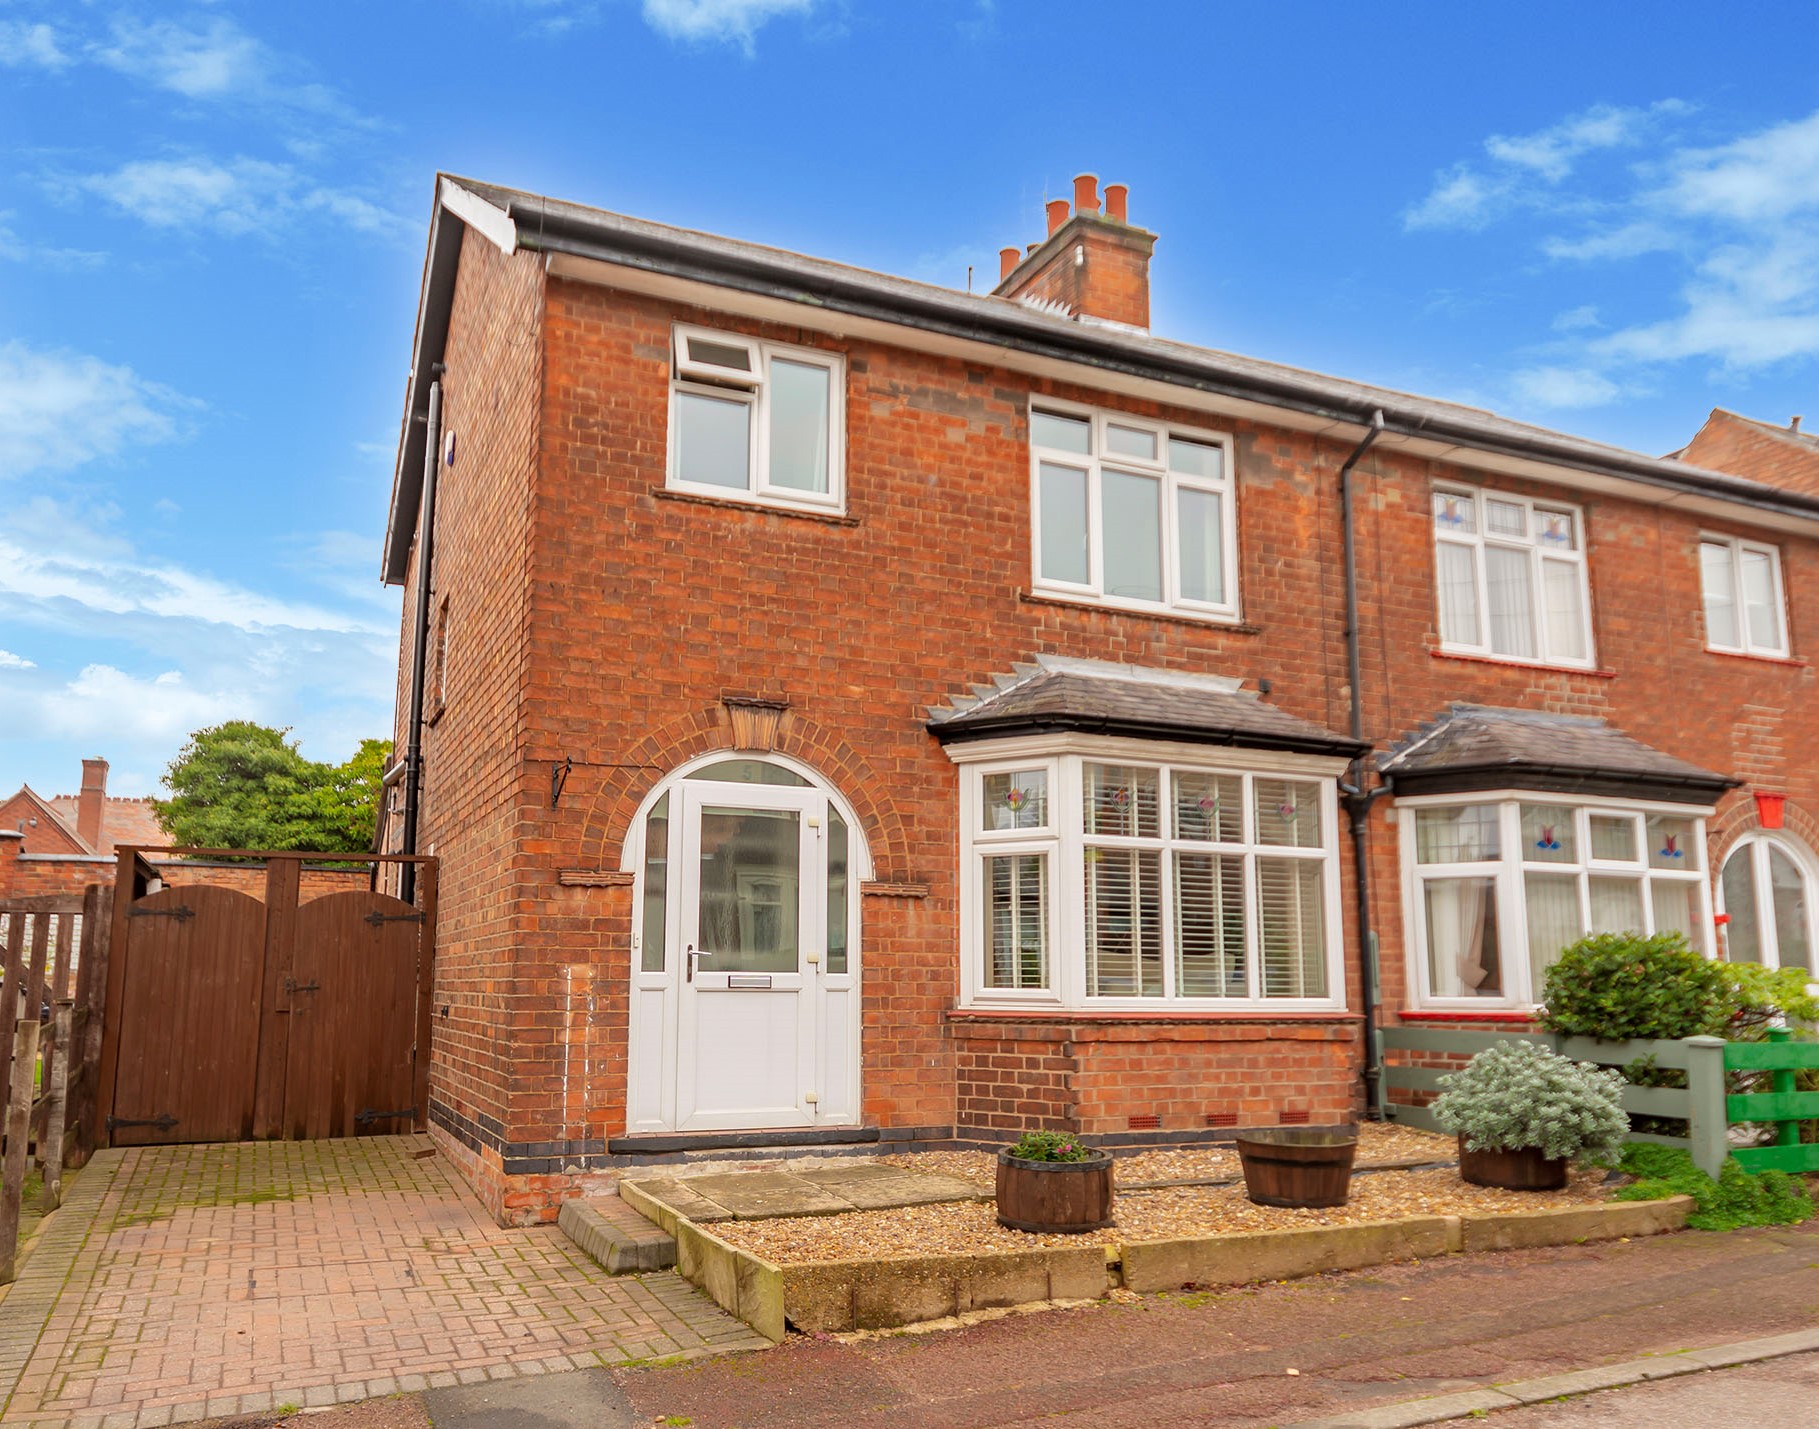 3 bed house for sale in Stanley Road, West Bridgford - Property Image 1